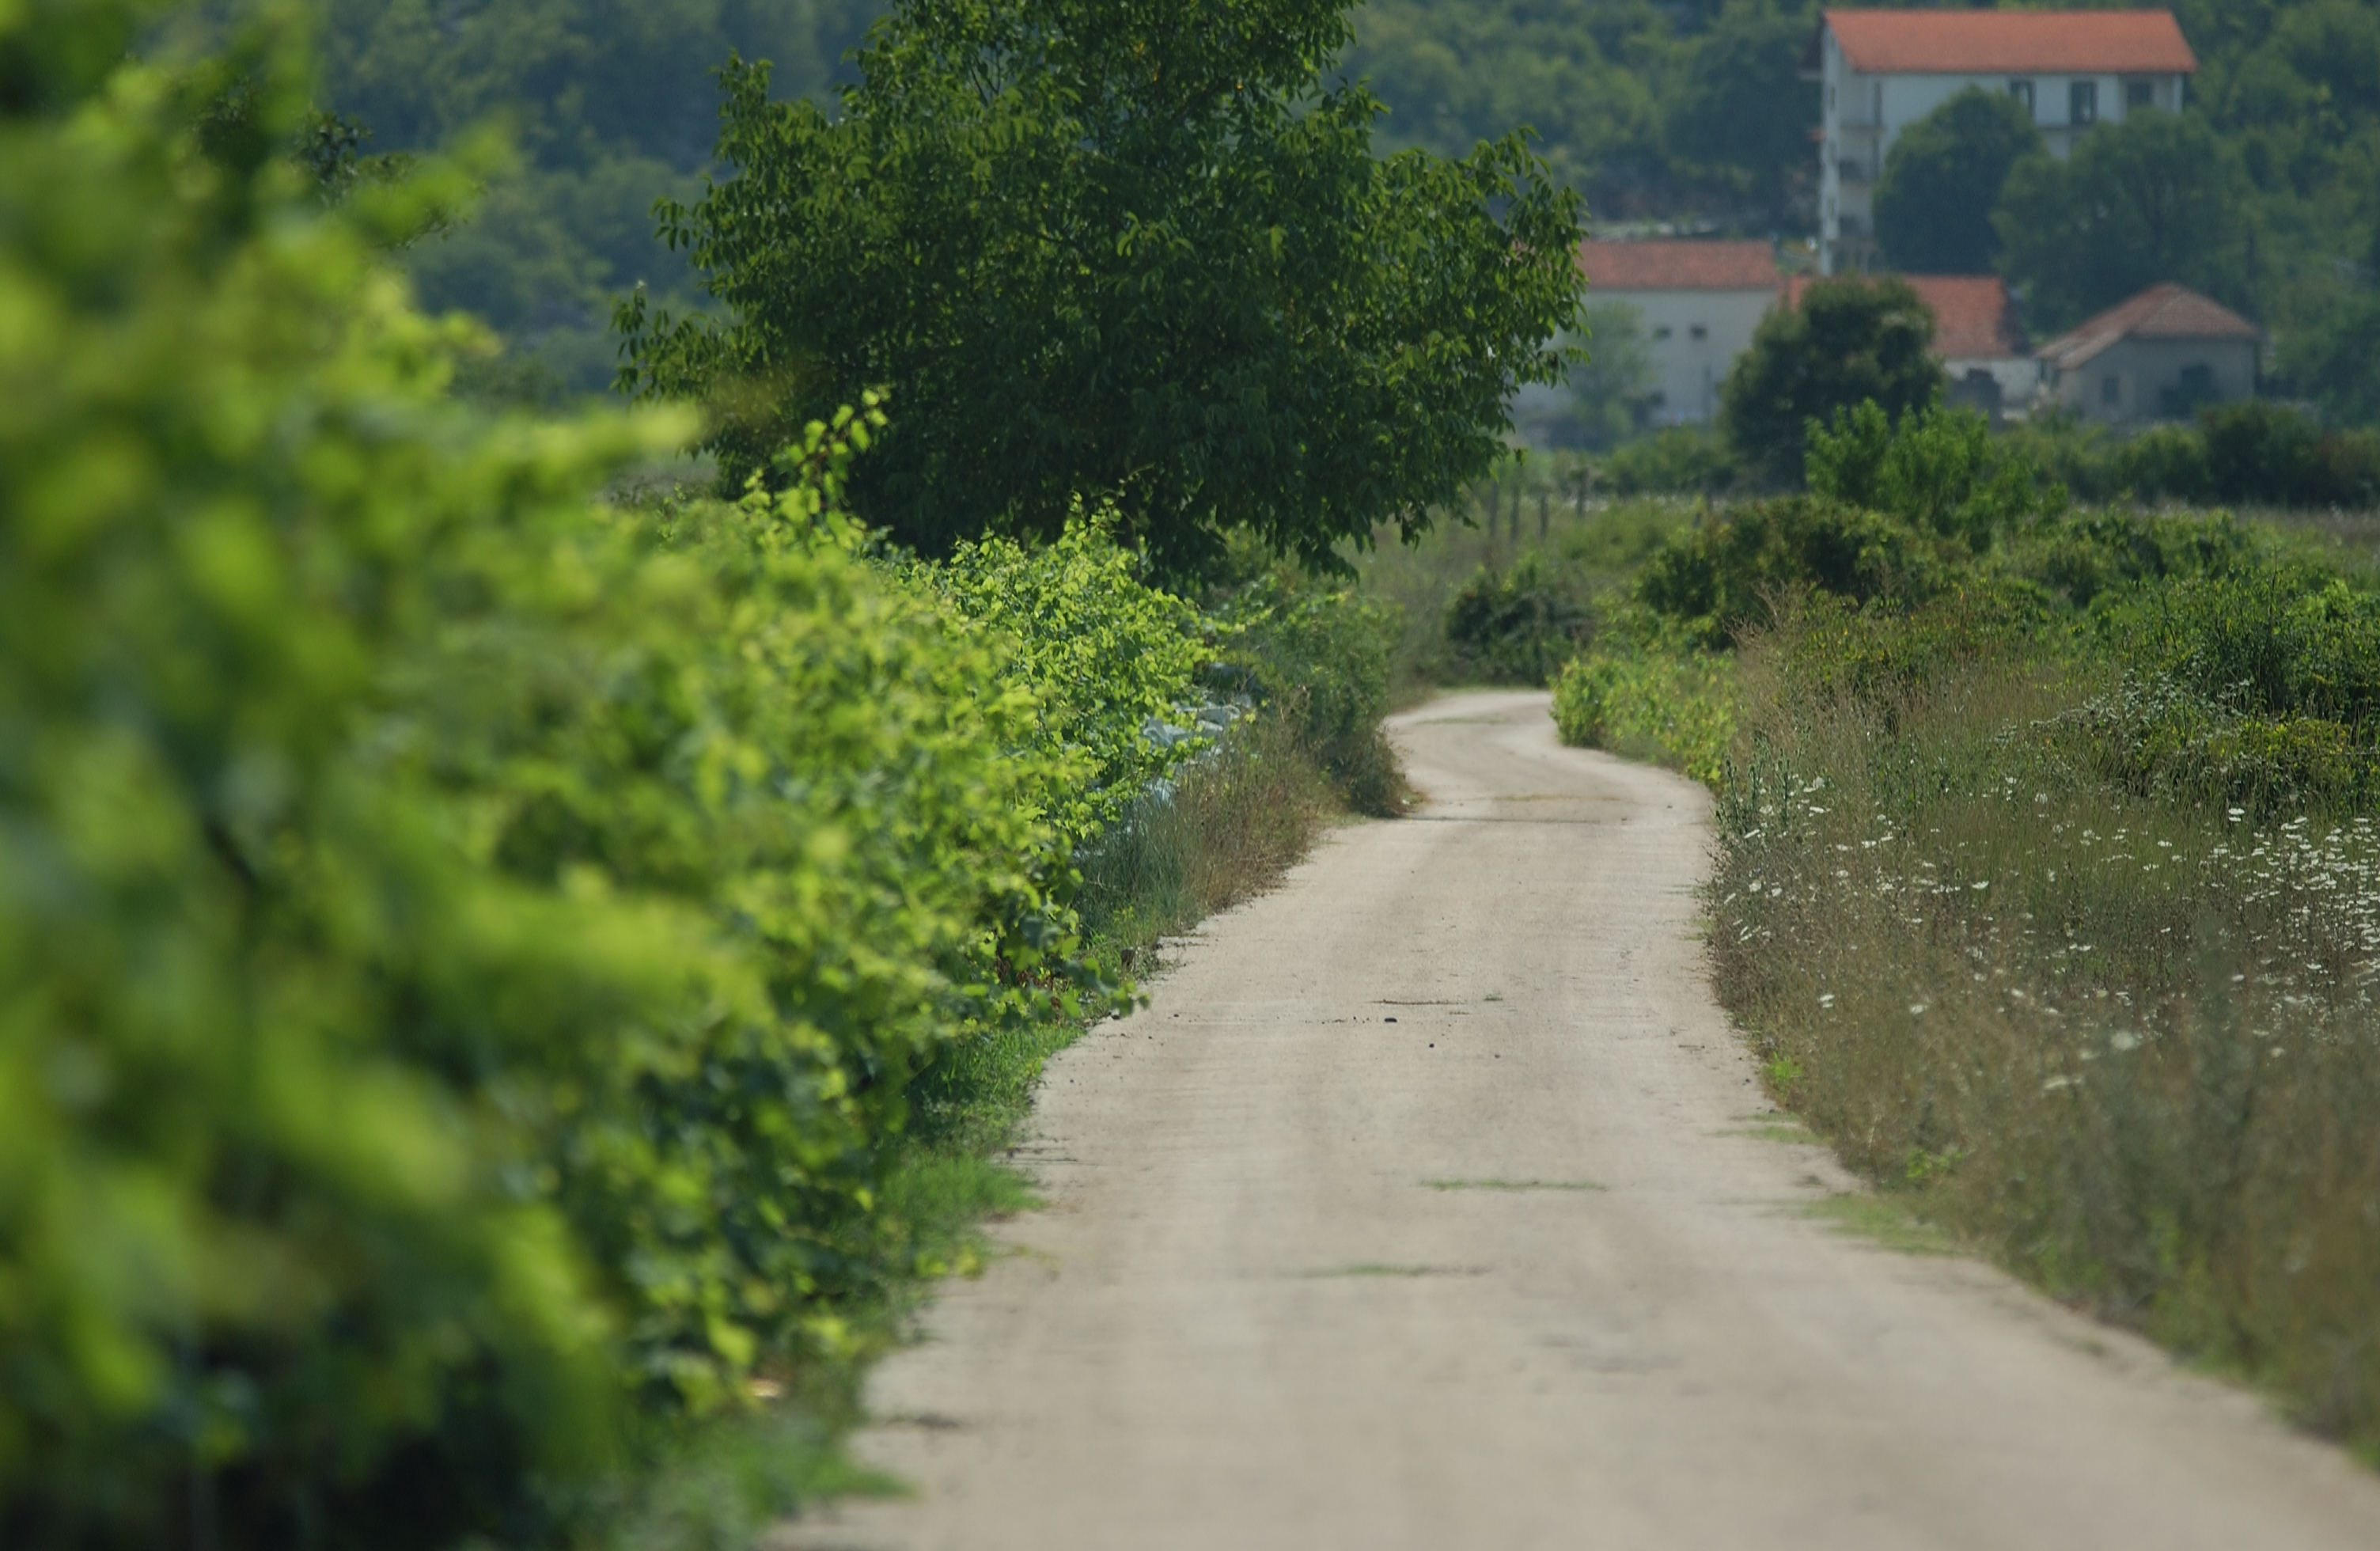 One of the many paths in Medjugorje